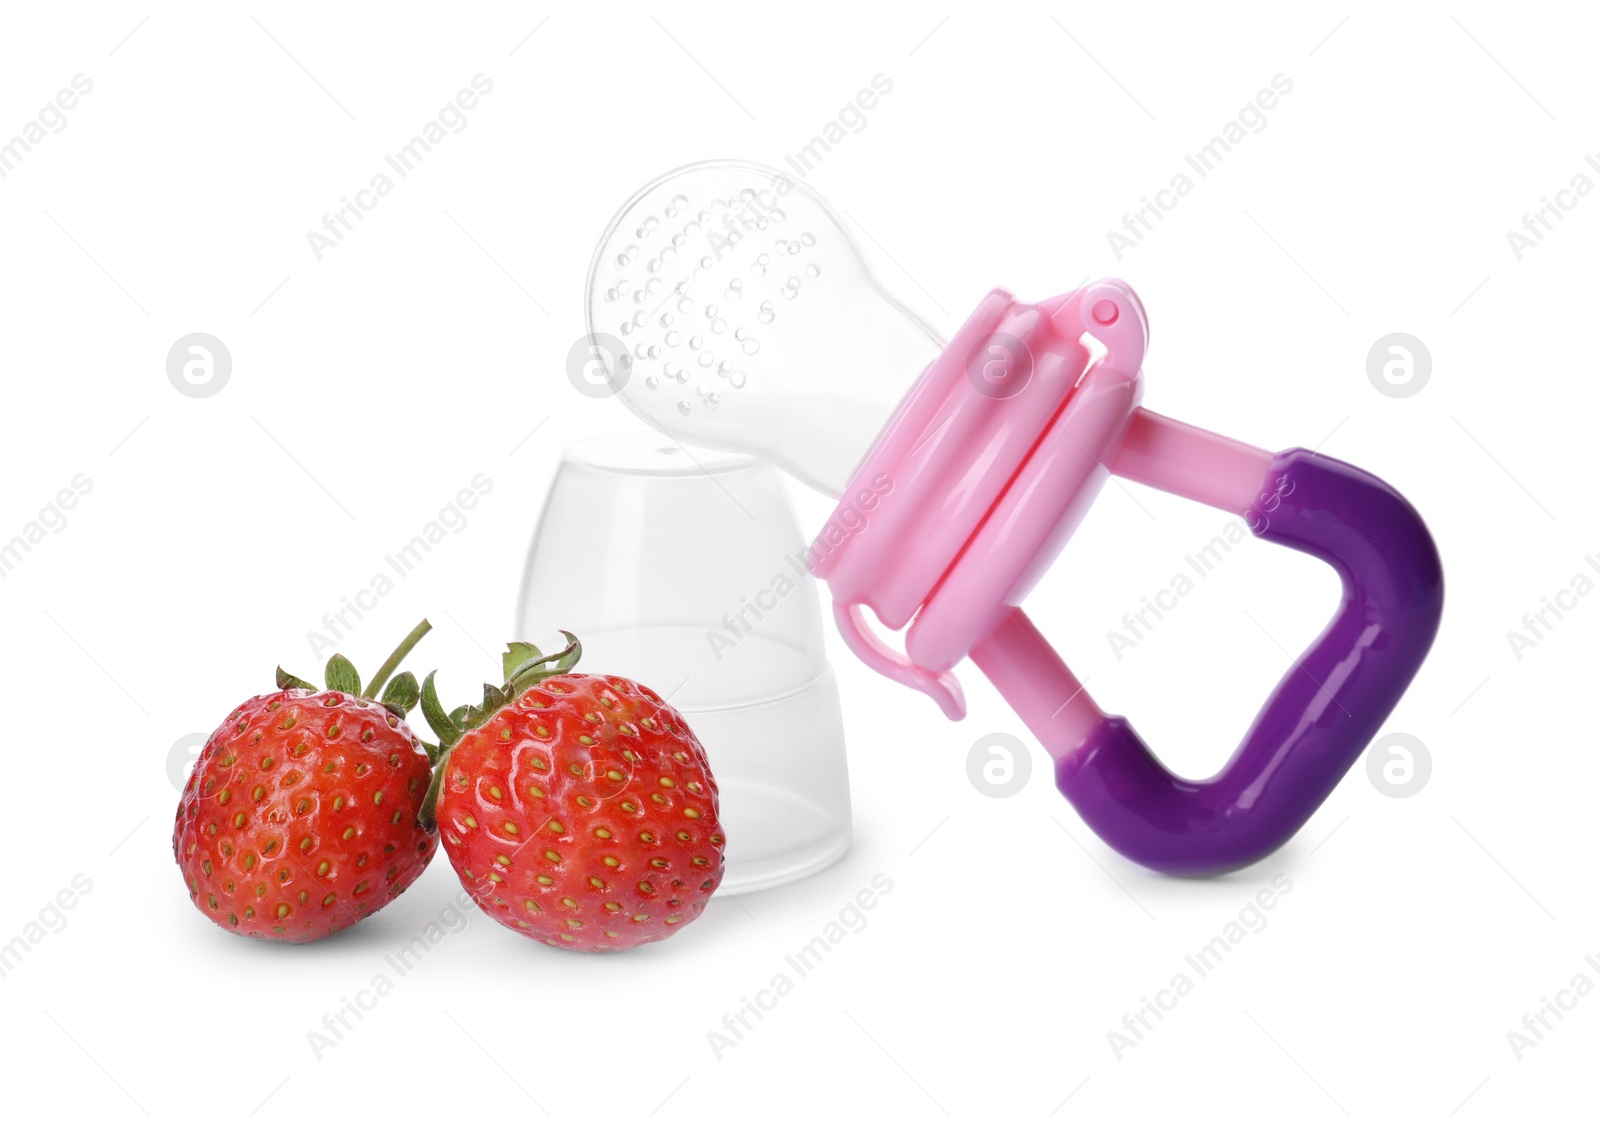 Photo of Empty nibbler and strawberries on white background. Baby feeder